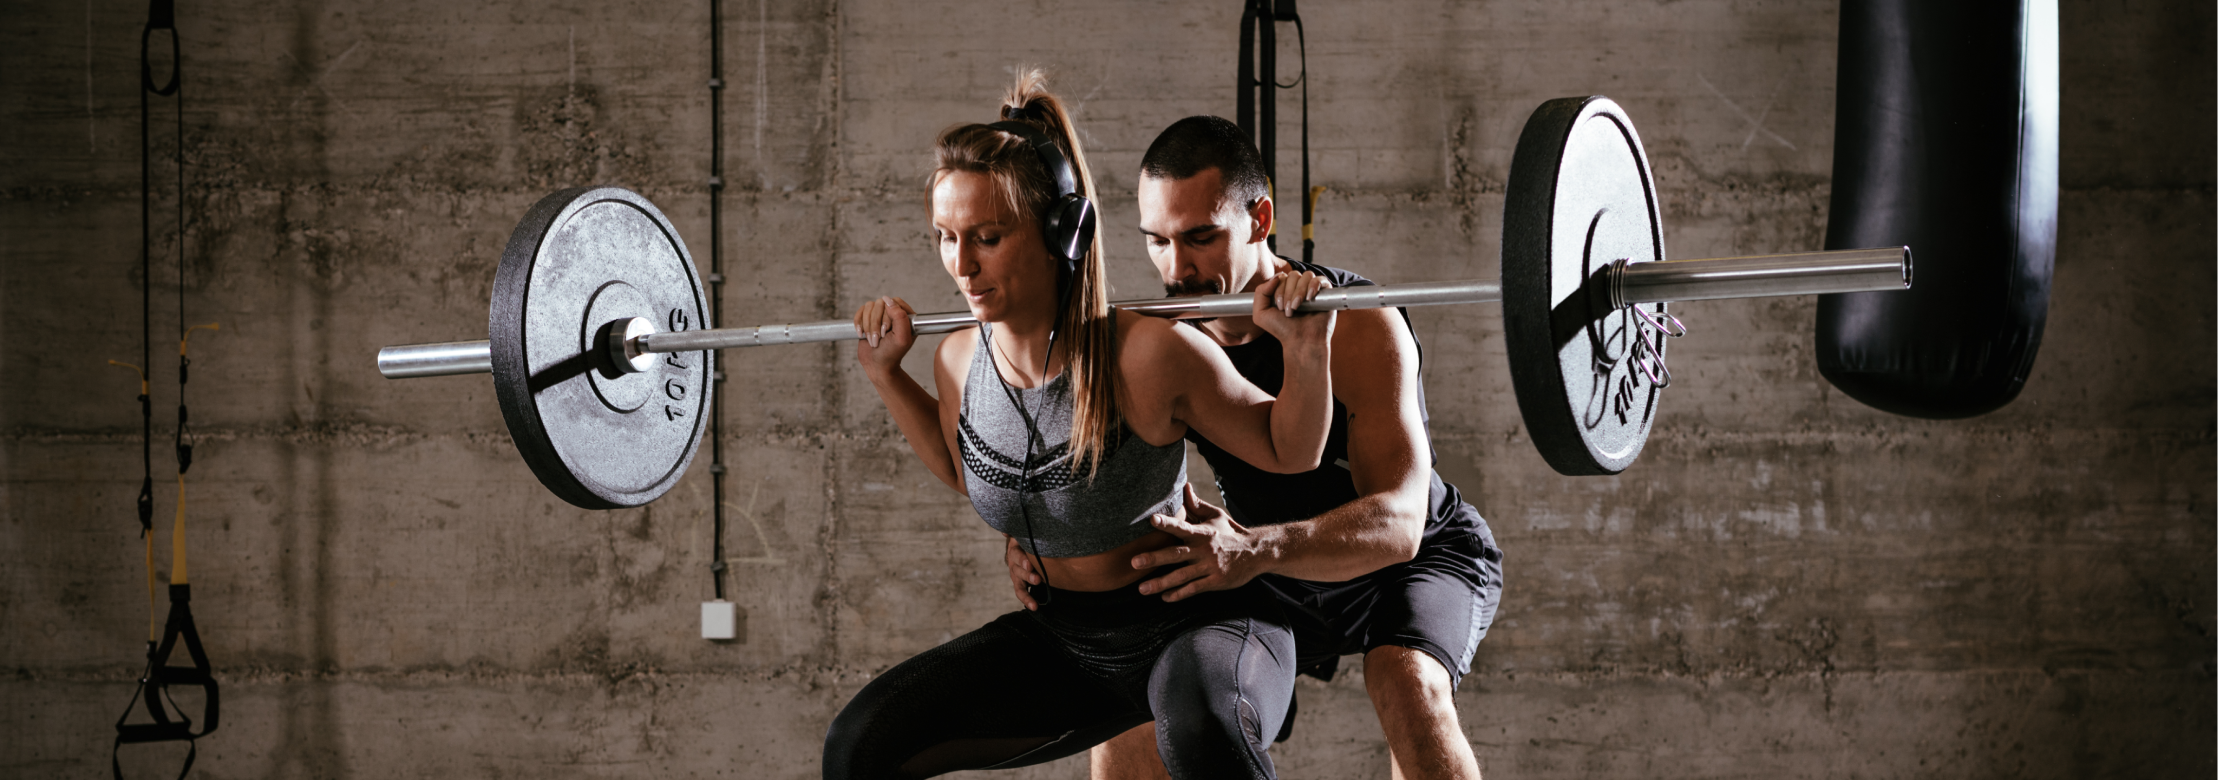 5 Tips To Get Your First 10 Personal Training Clients